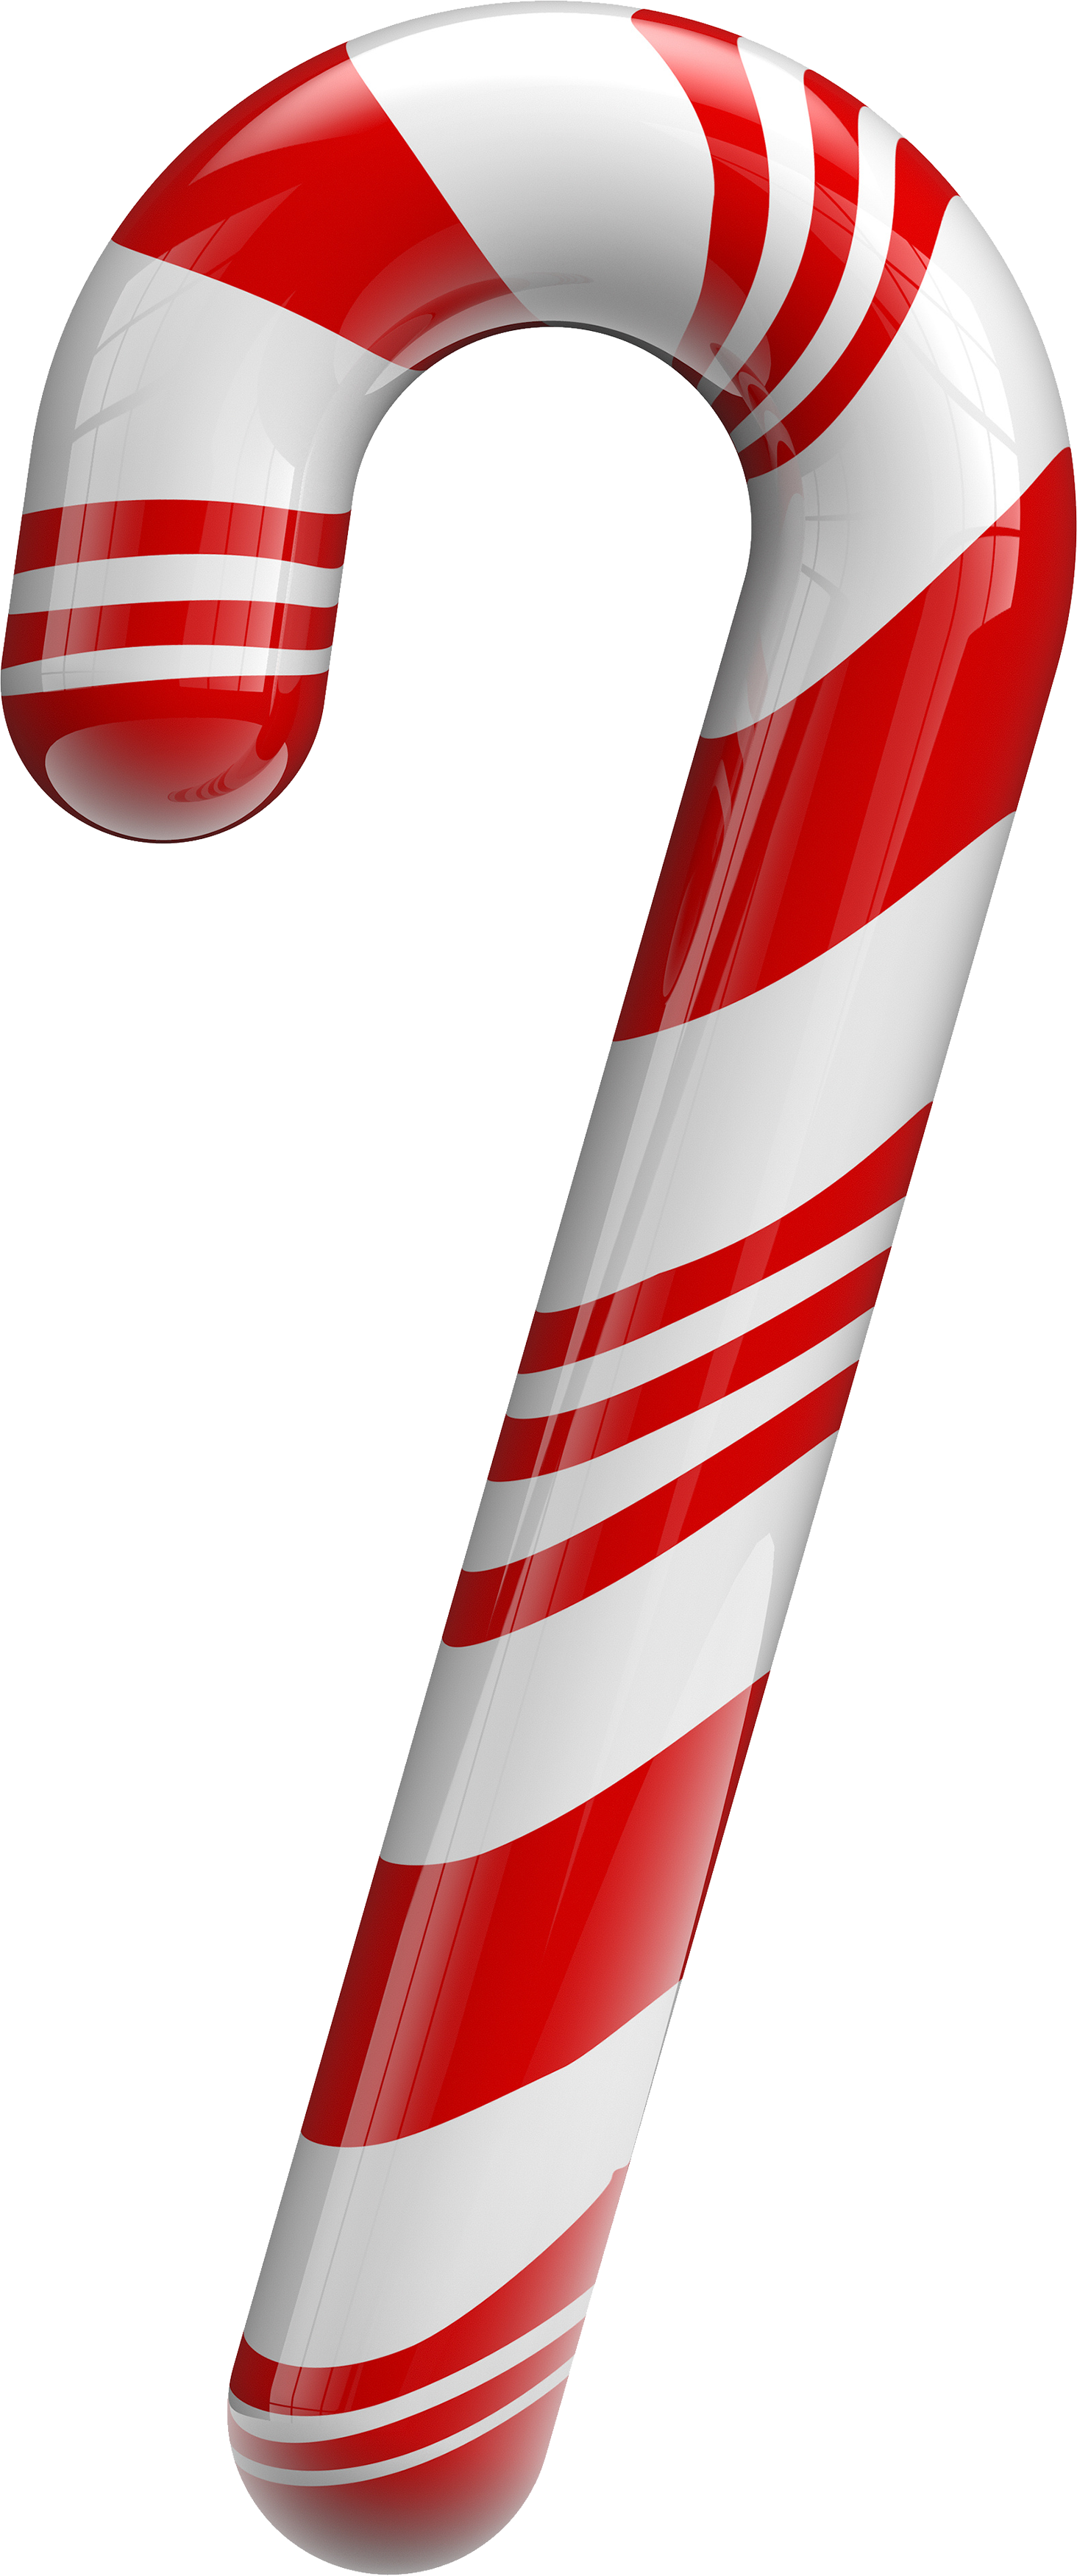 Cane Downloads Pick Candy Christmas Ups, Decorations, Clipart